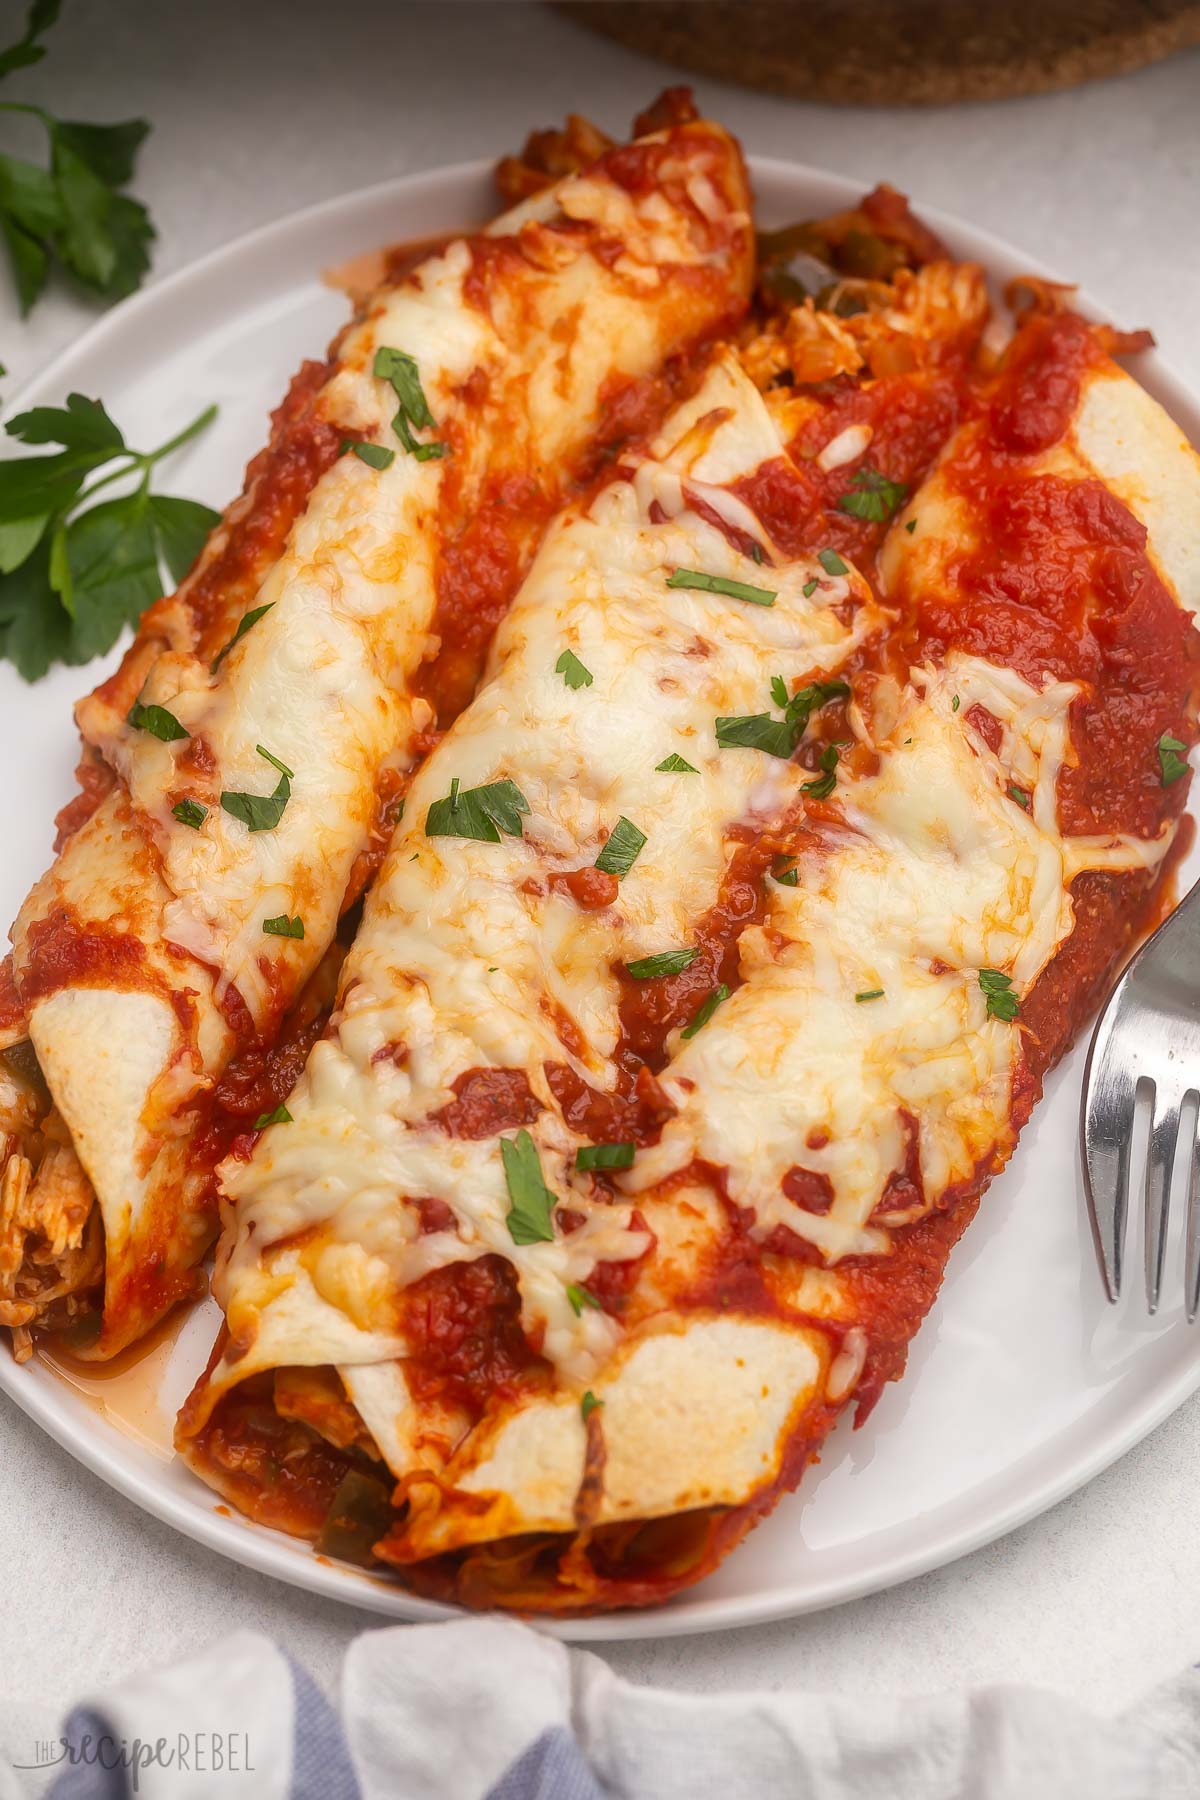 Top view of three enchiladas on a white plate with a fork beside them.